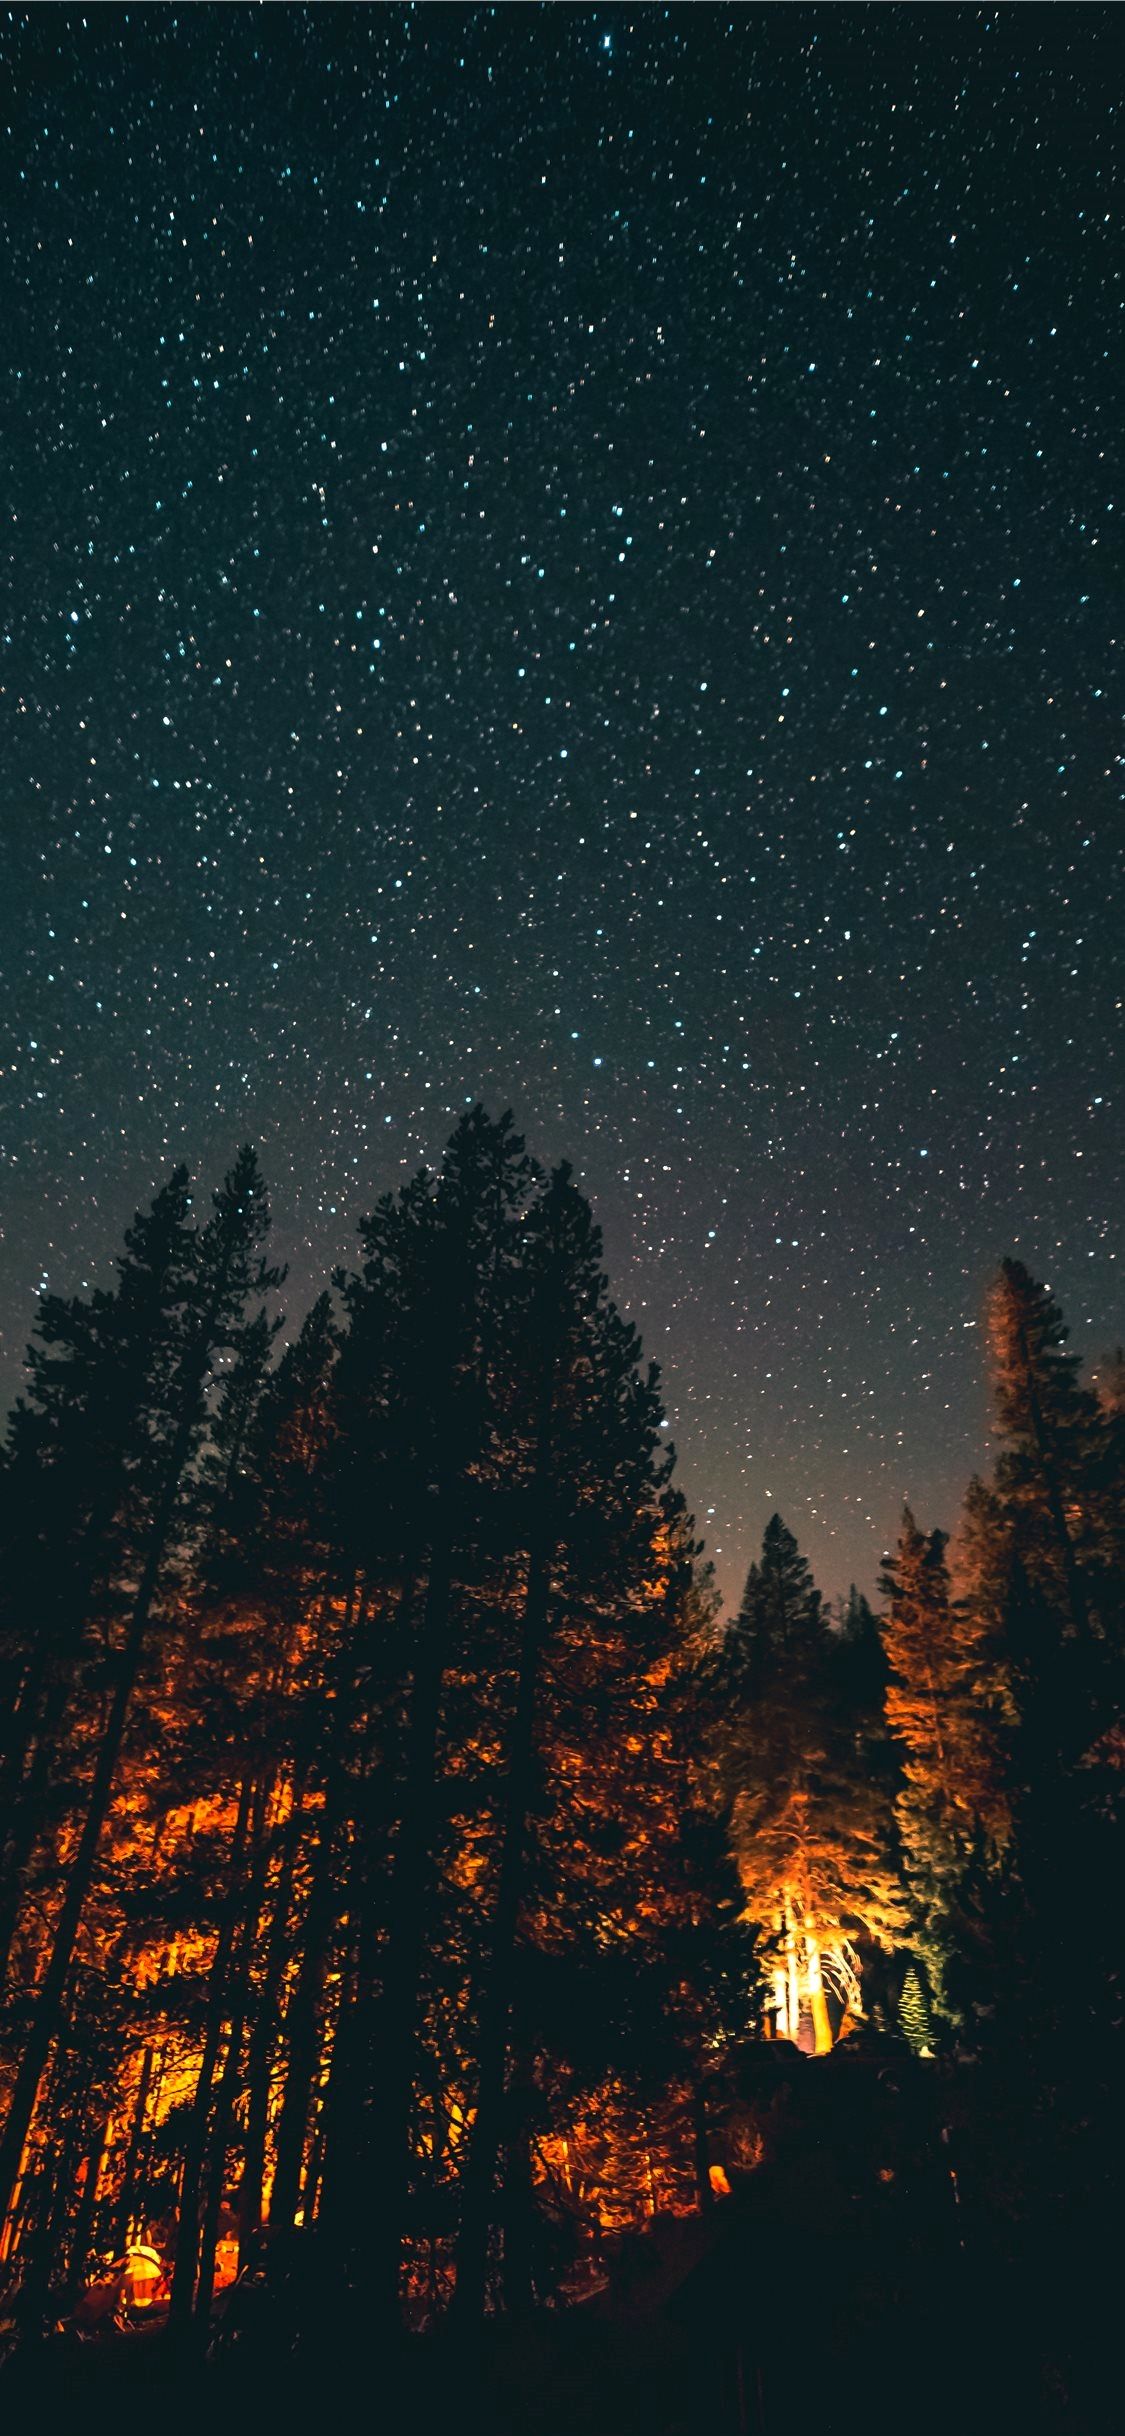 iPhone Xs Wallpaper 4K Ideas. Nature photography, Landscape photography, Night sky wallpaper